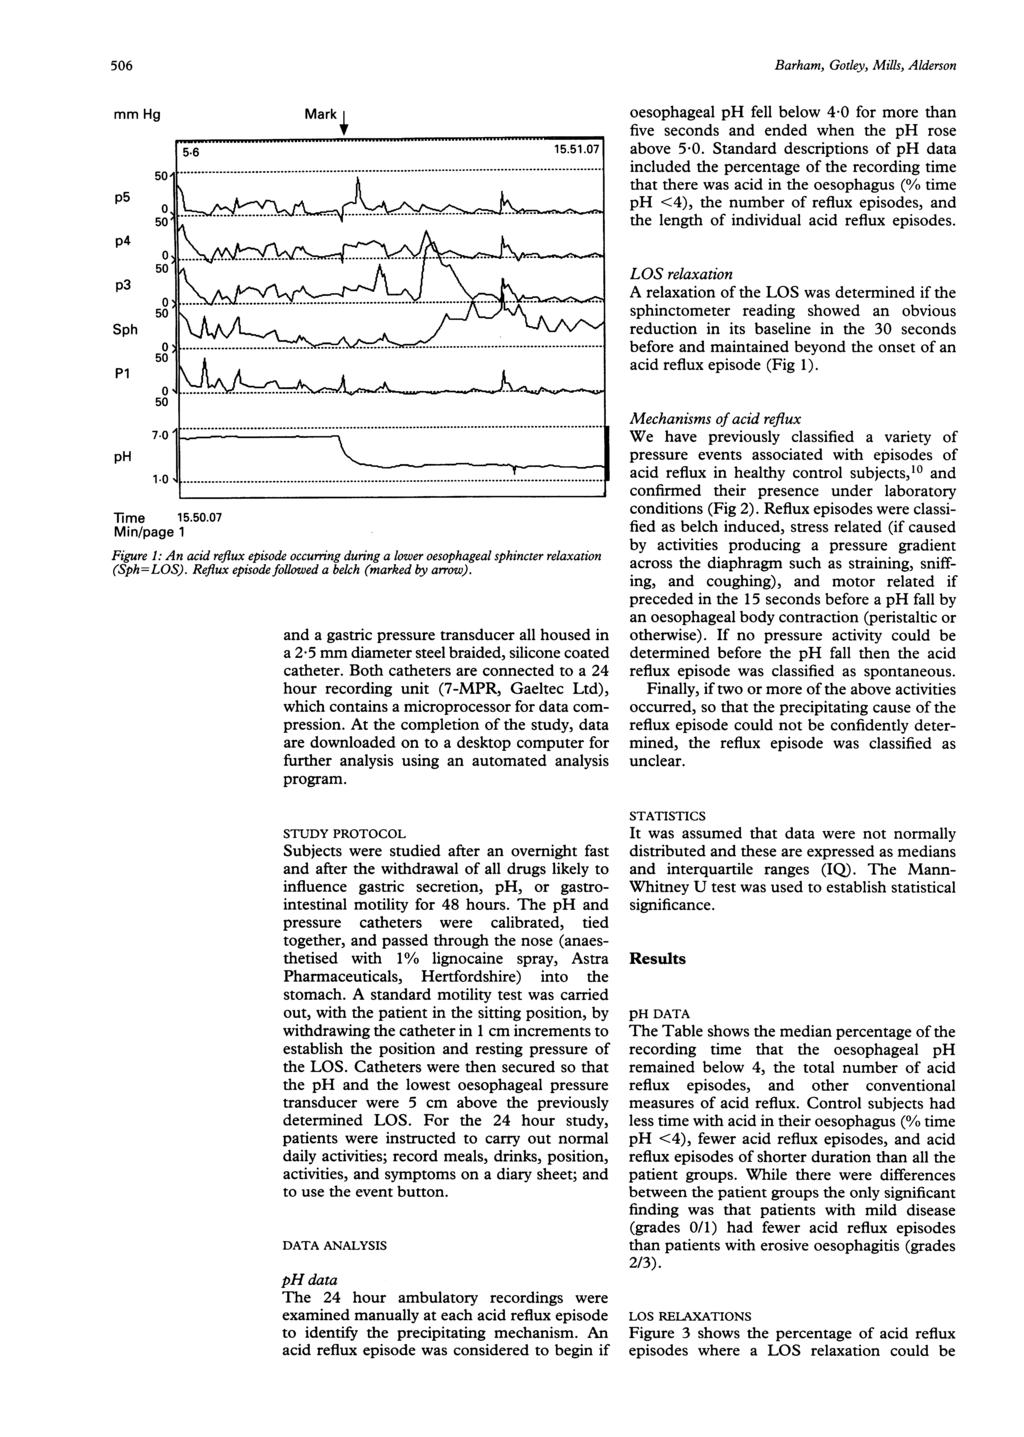 506 mm Hg p5 p4 S 5 5... p0 50' 50 50 70 Mark 5-6 15.51.07...... Time 15.50.07 Min/page 1 Figure 1: An acid reflux episode occuring during a lower oesophageal sphincter relaxation (=LOS).